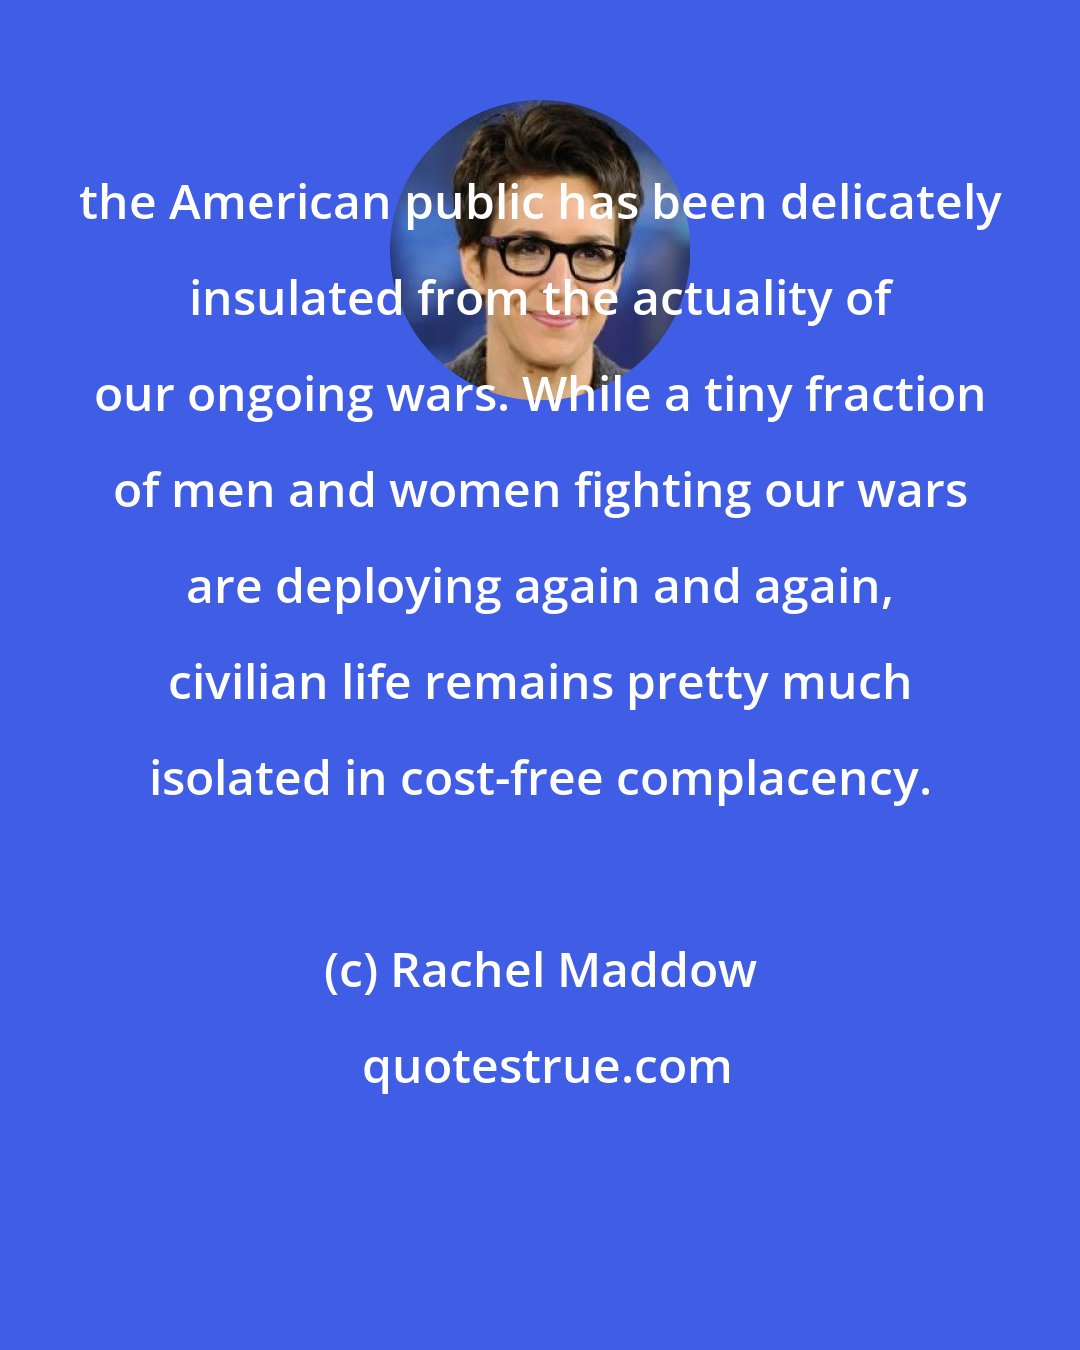 Rachel Maddow: the American public has been delicately insulated from the actuality of our ongoing wars. While a tiny fraction of men and women fighting our wars are deploying again and again, civilian life remains pretty much isolated in cost-free complacency.